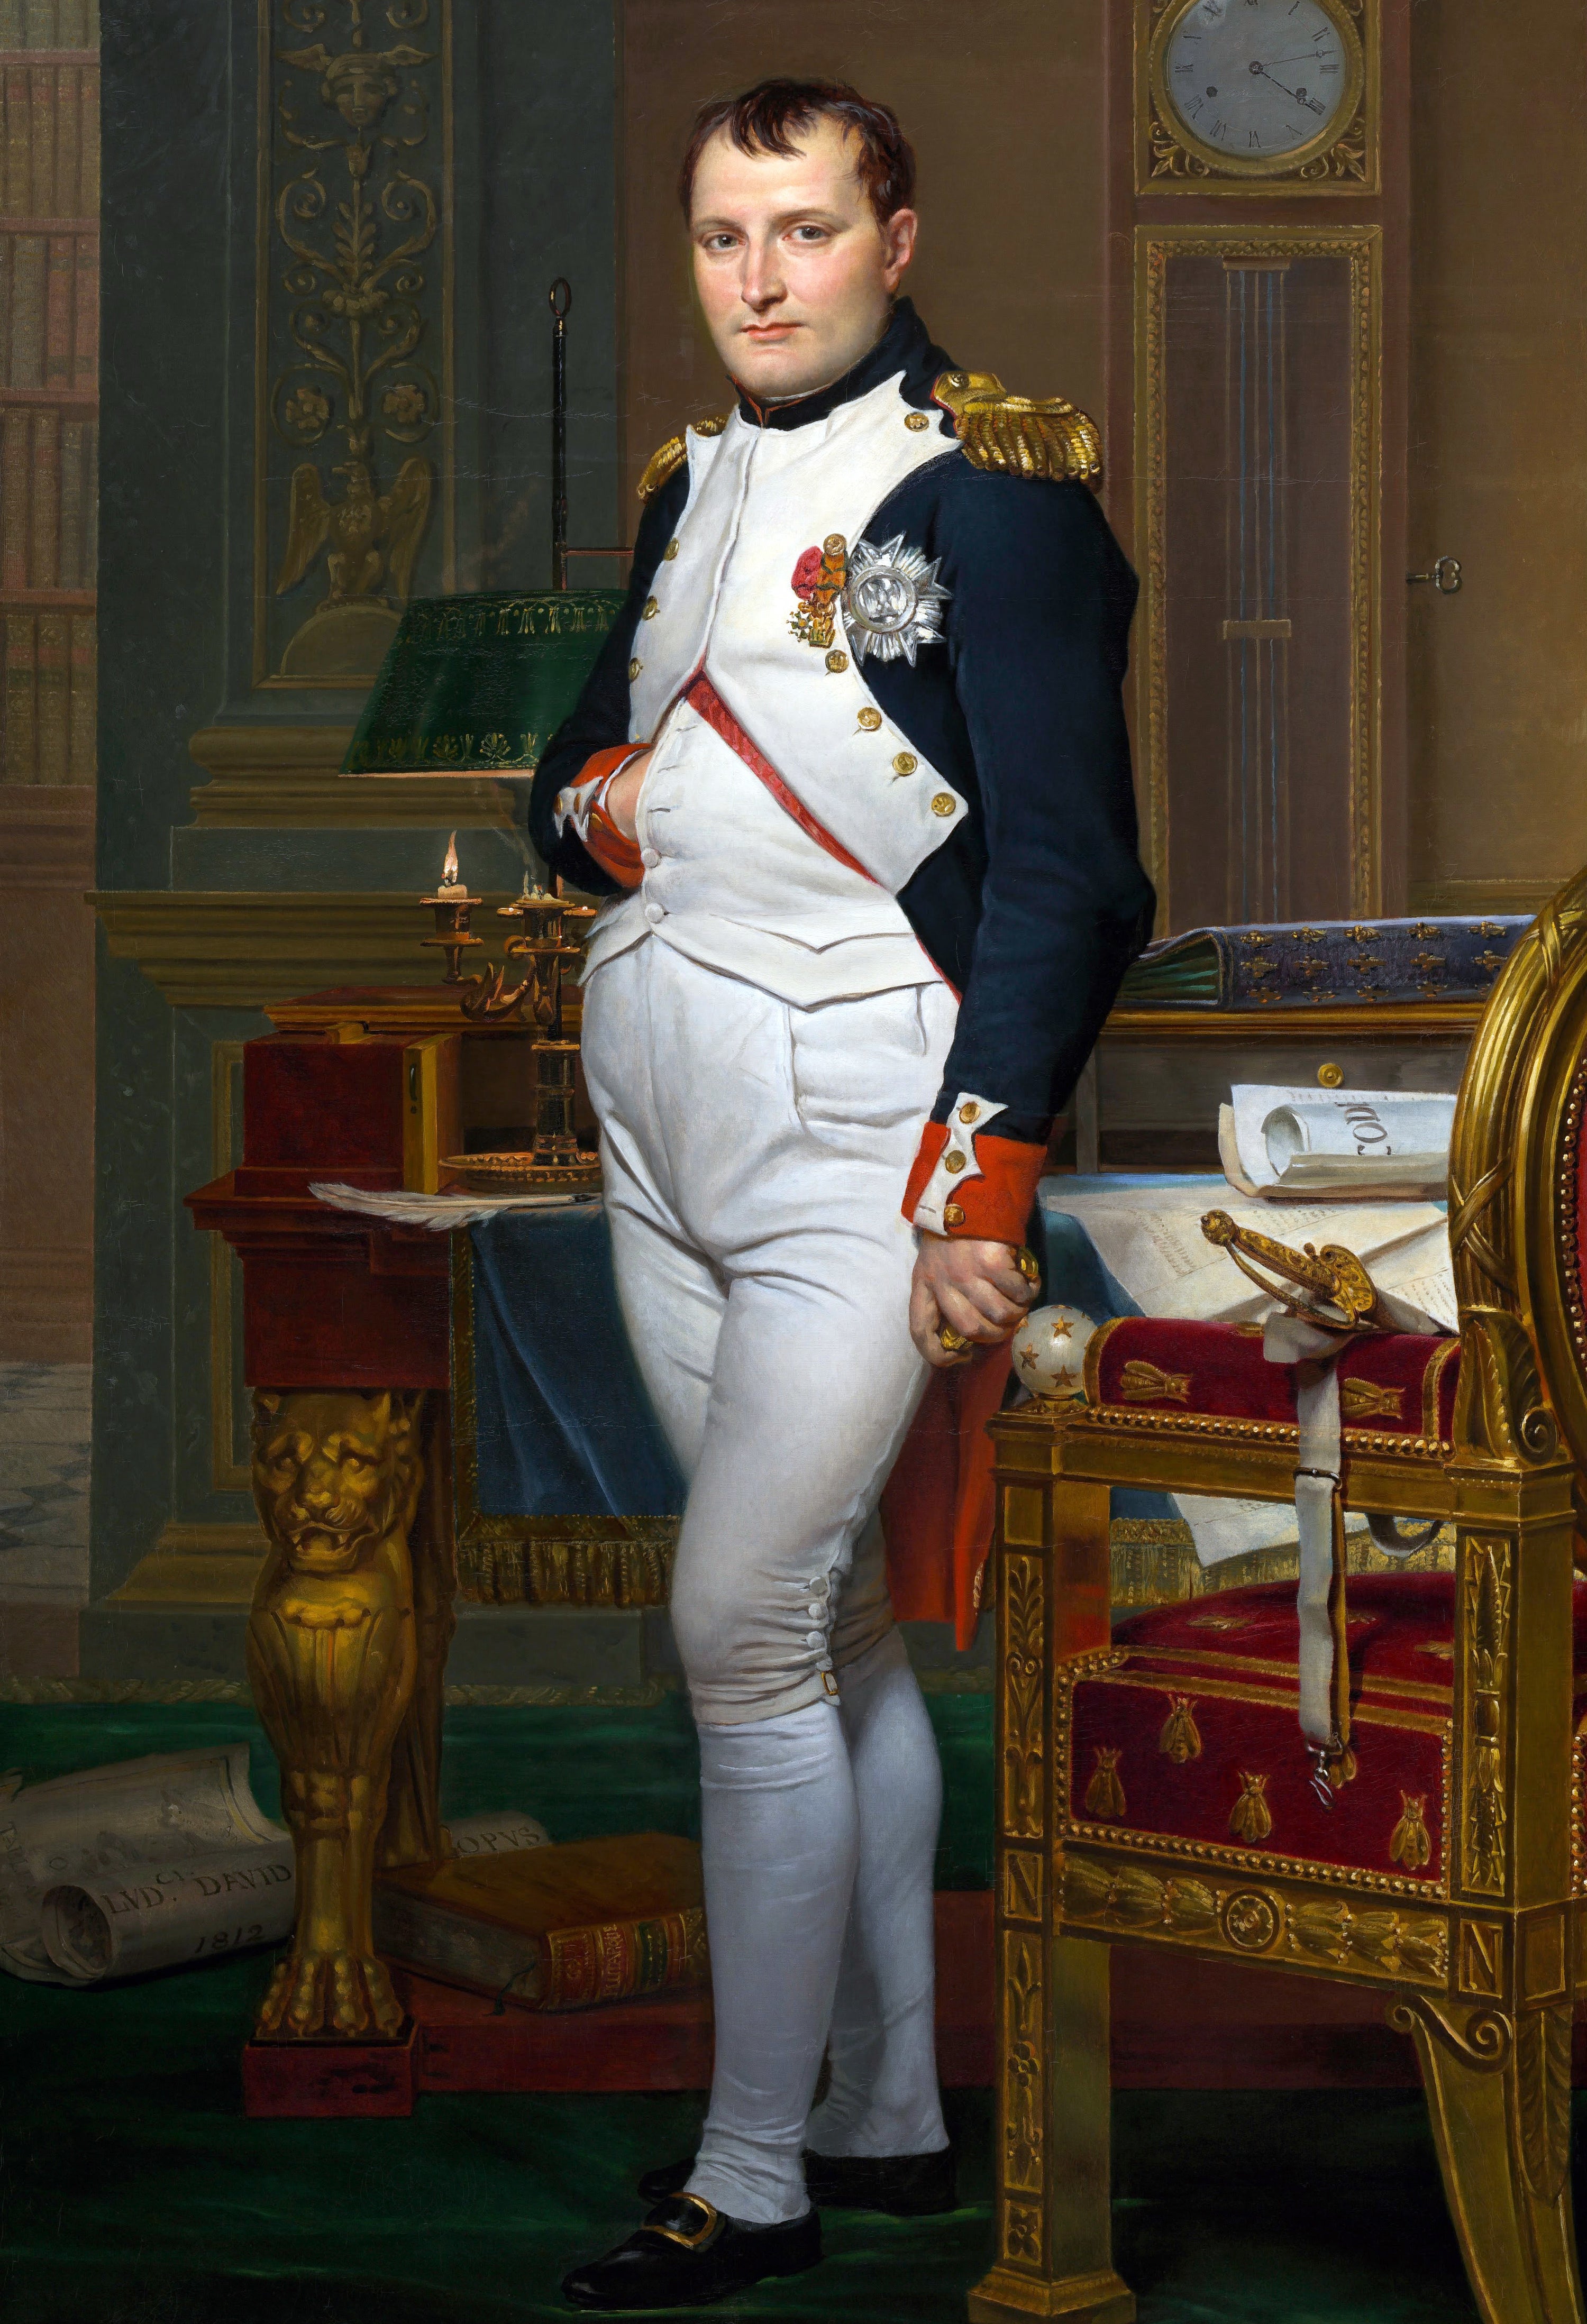 A painting of Napoleon in military regalia standing next to a chair in an ornately-decorated room